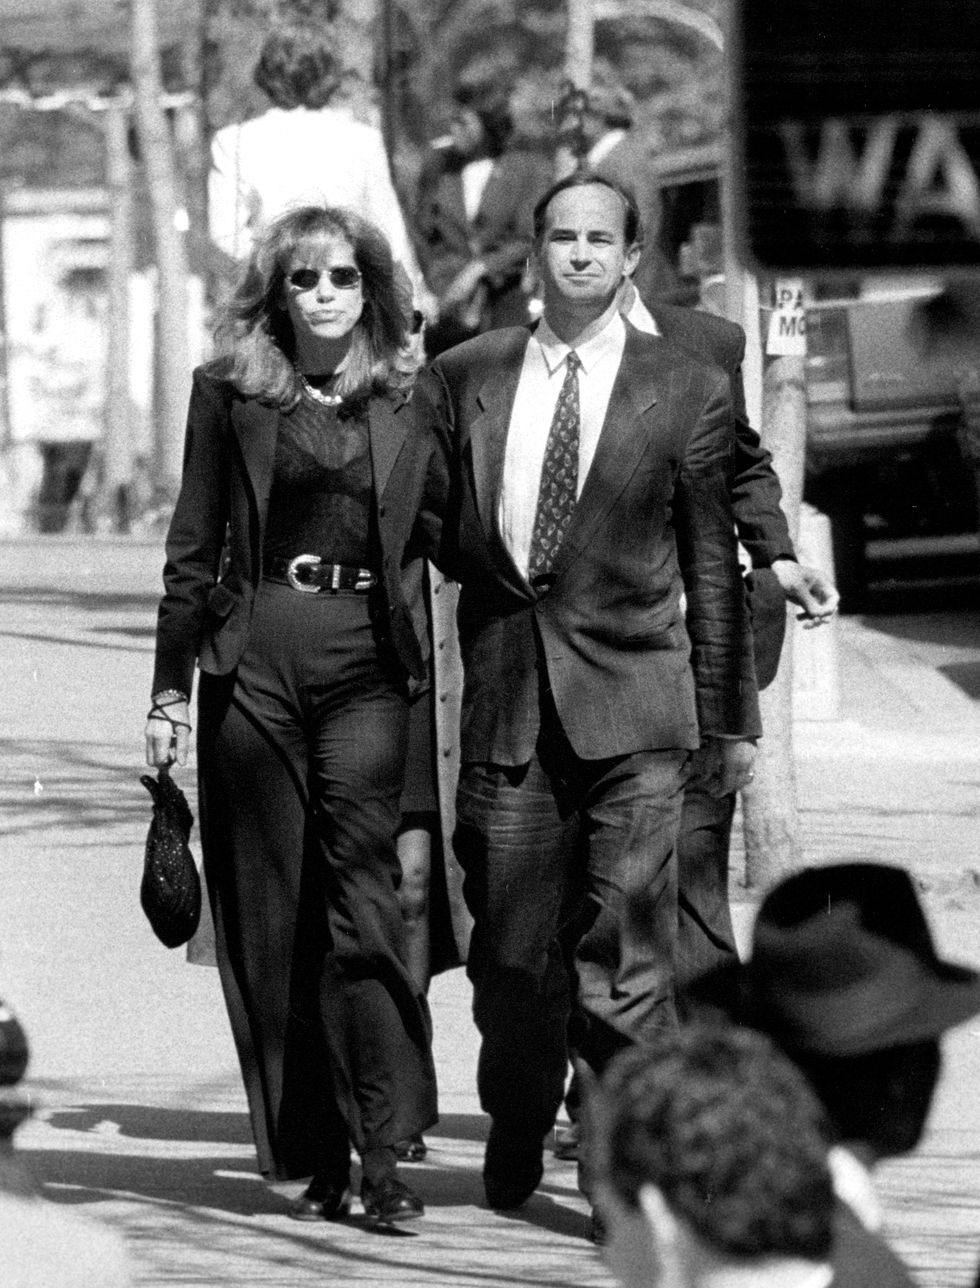 Carly Simon arrives at Jacqueline Kennedy Onassis' funeral on May 23, 1994.